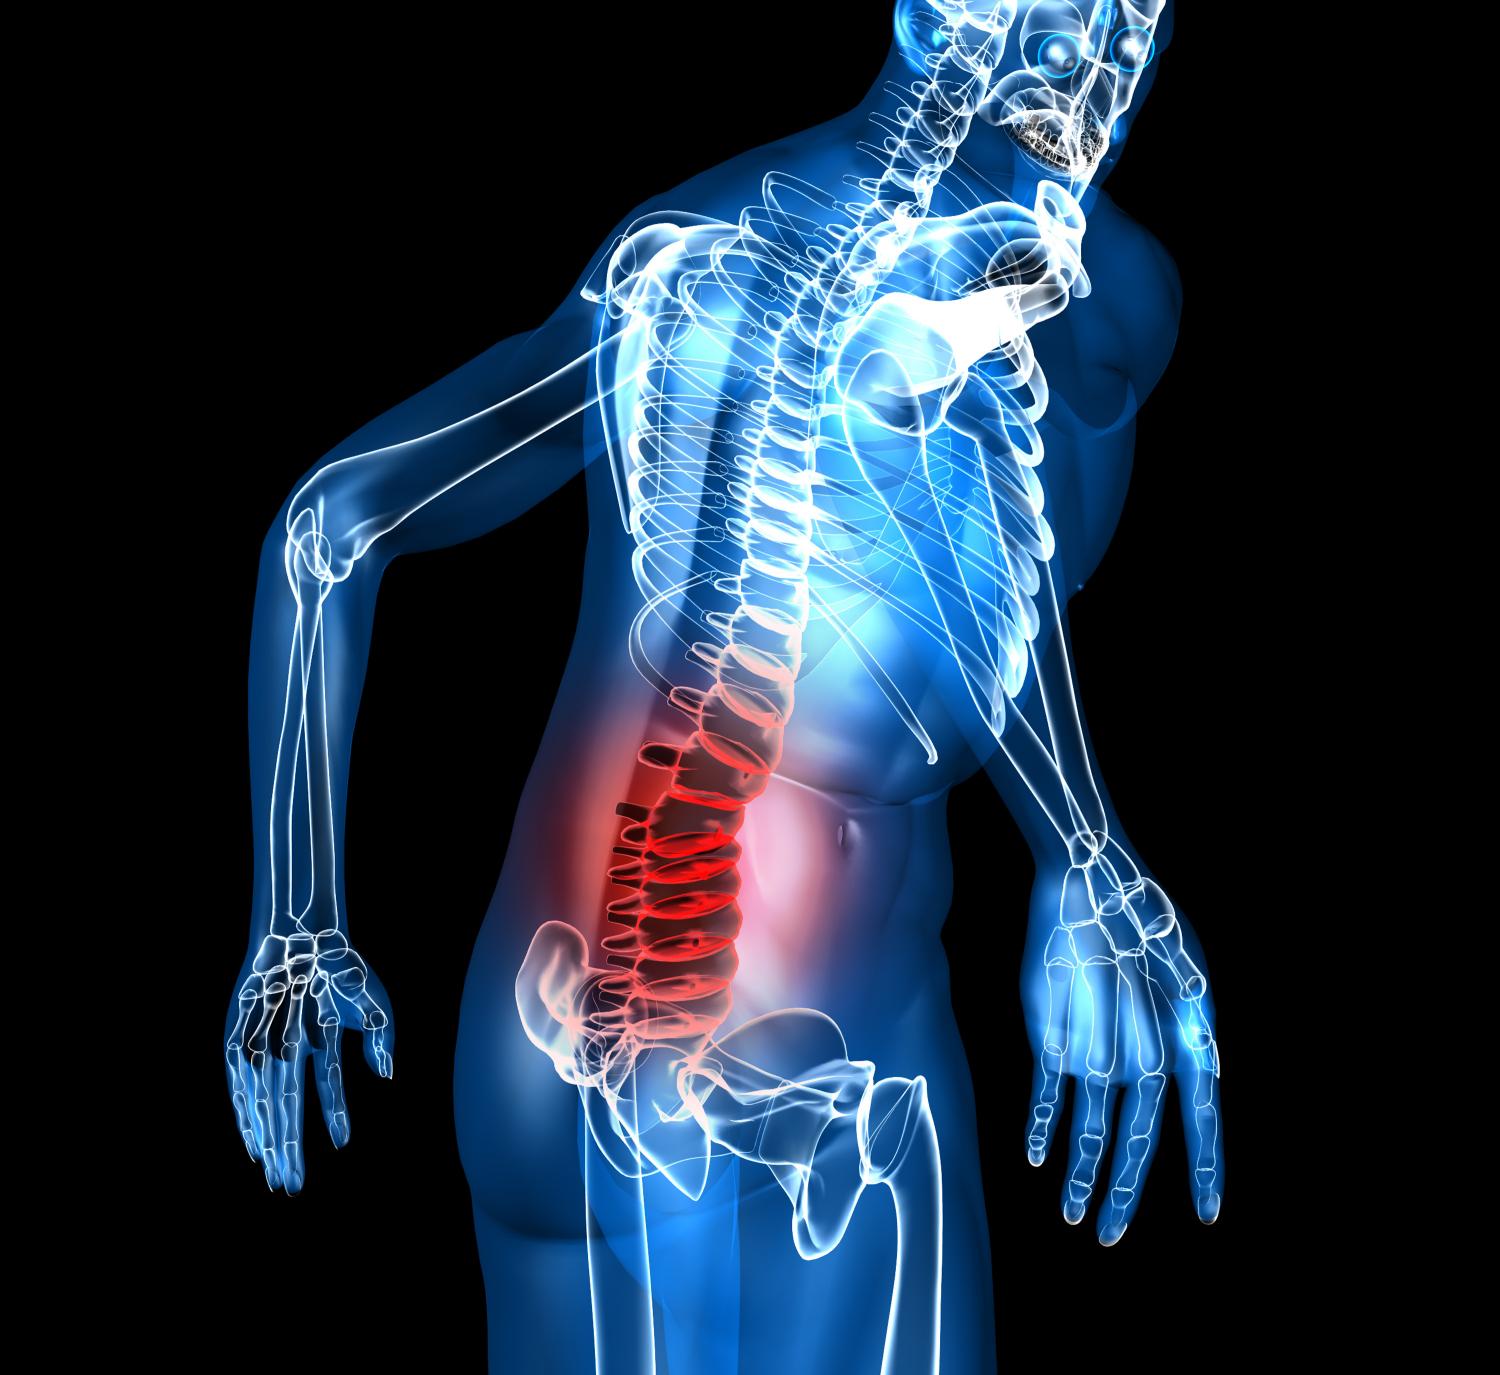 Placebo and valium are equally effective for acute lower back pain ...